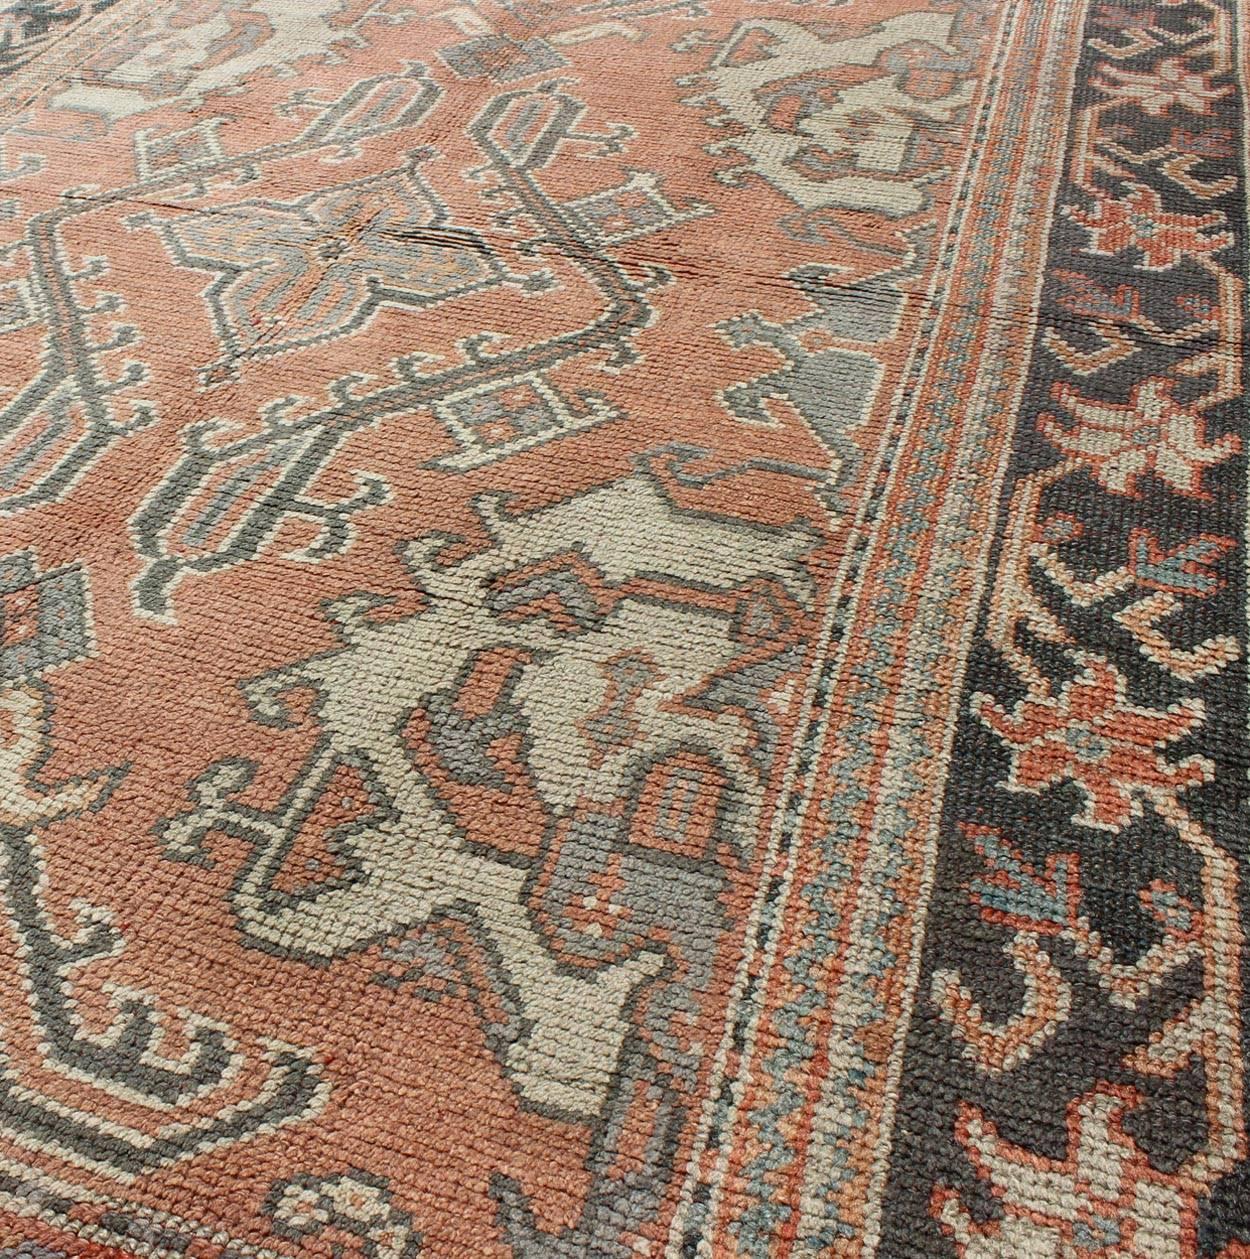 Antique Oushak Rug from Turkey with Central Medallion and Sub-Geometric Elements In Good Condition For Sale In Atlanta, GA